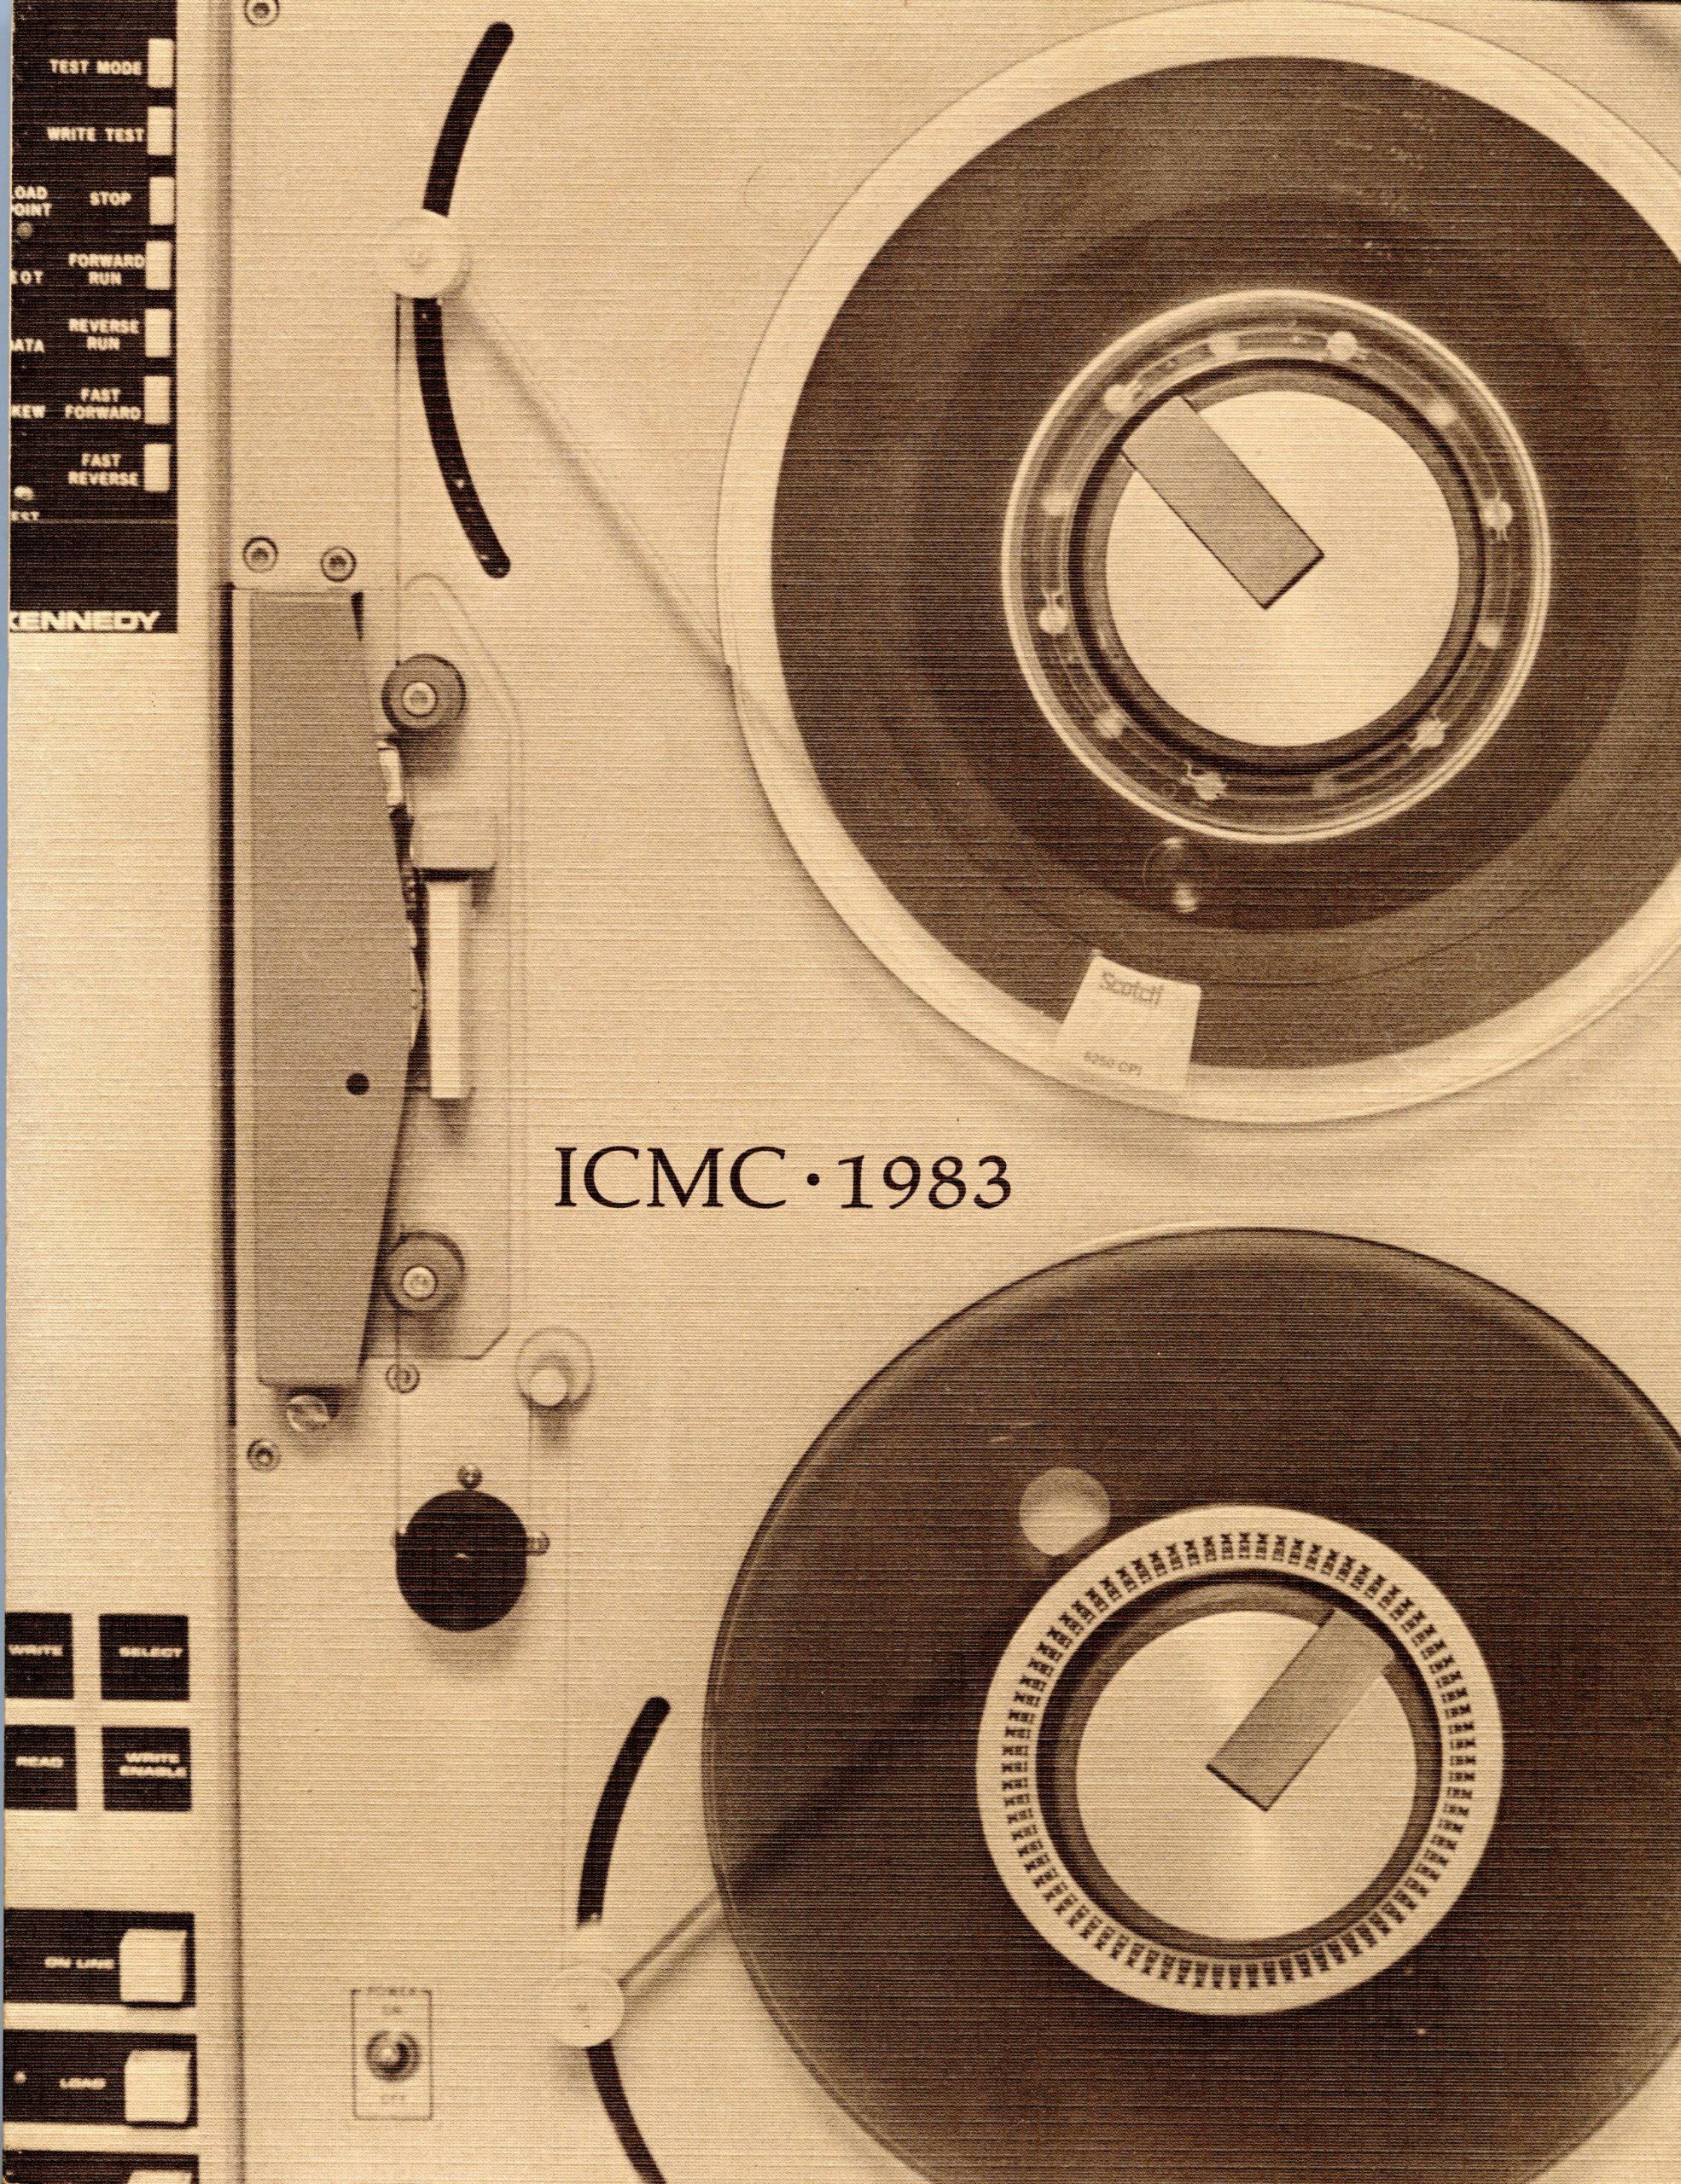 ICMC conference program, front cover